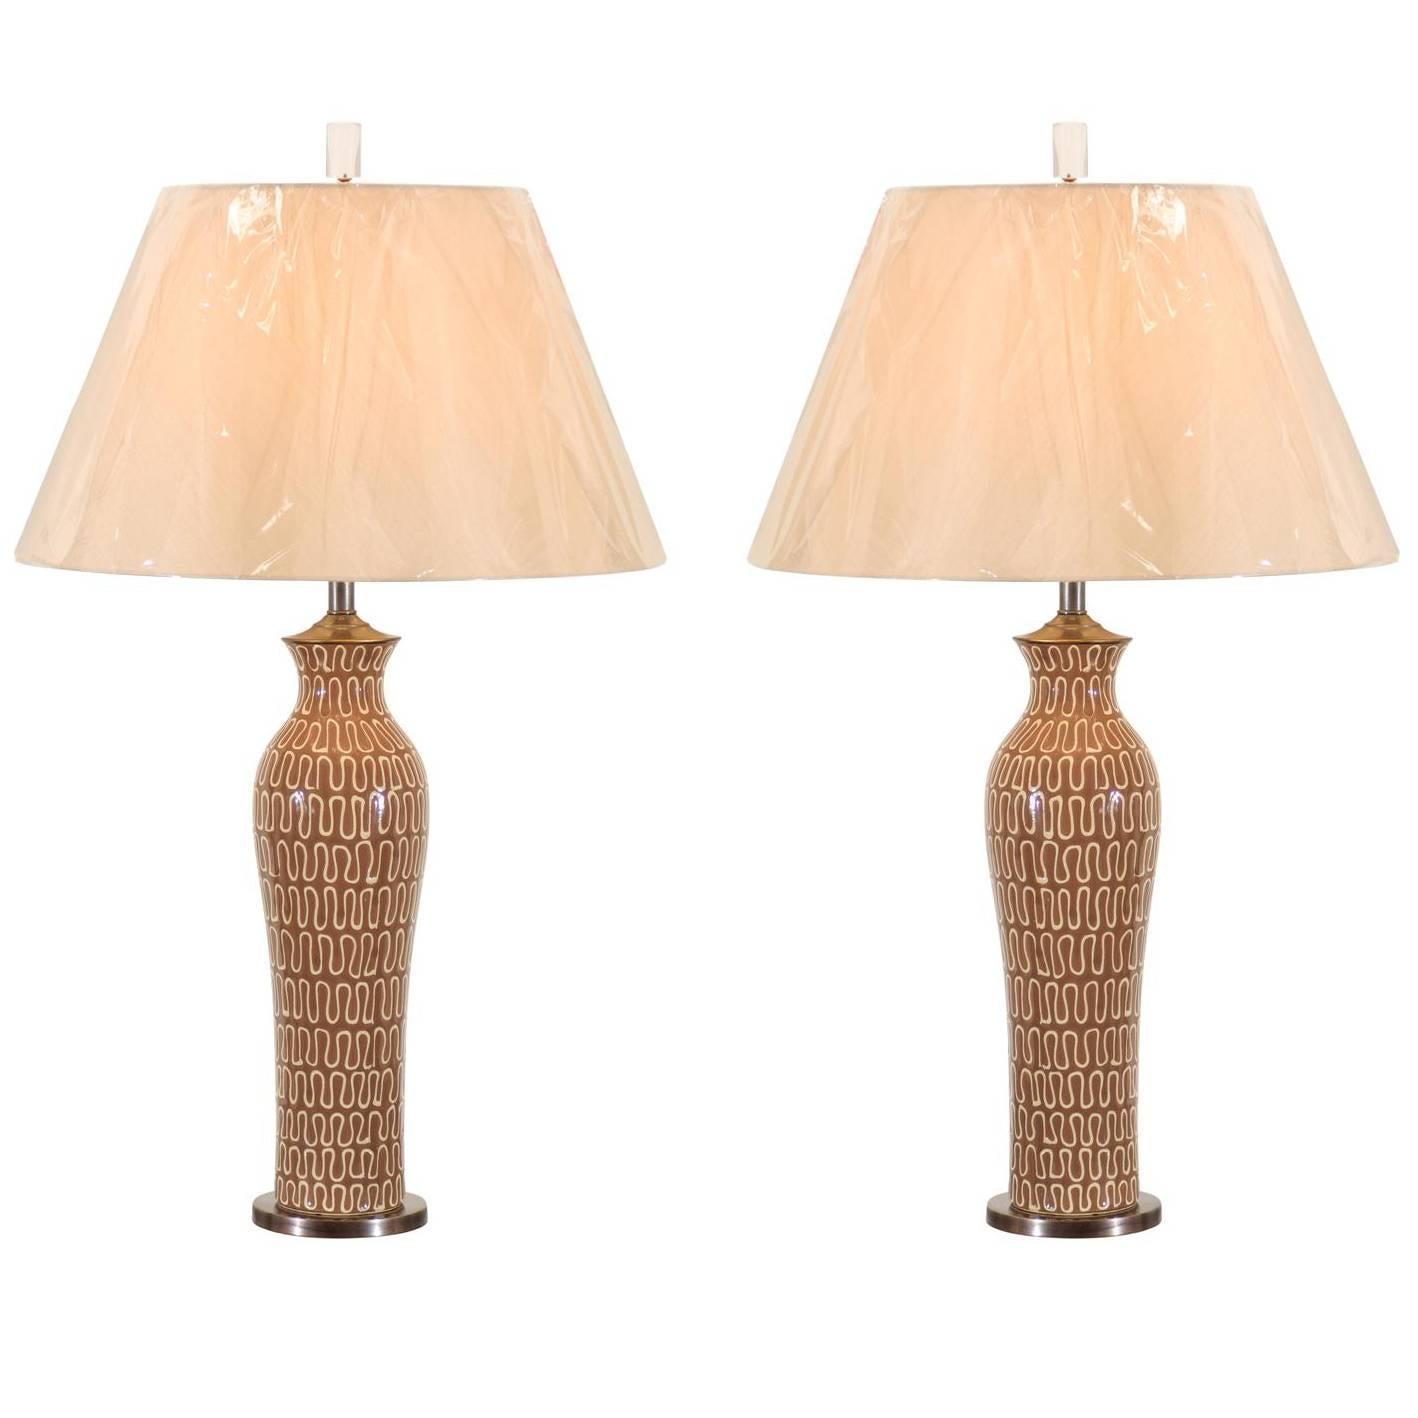 Gorgeous Pair of Glazed Ceramic Lamps with Lucite and Bronze Accents